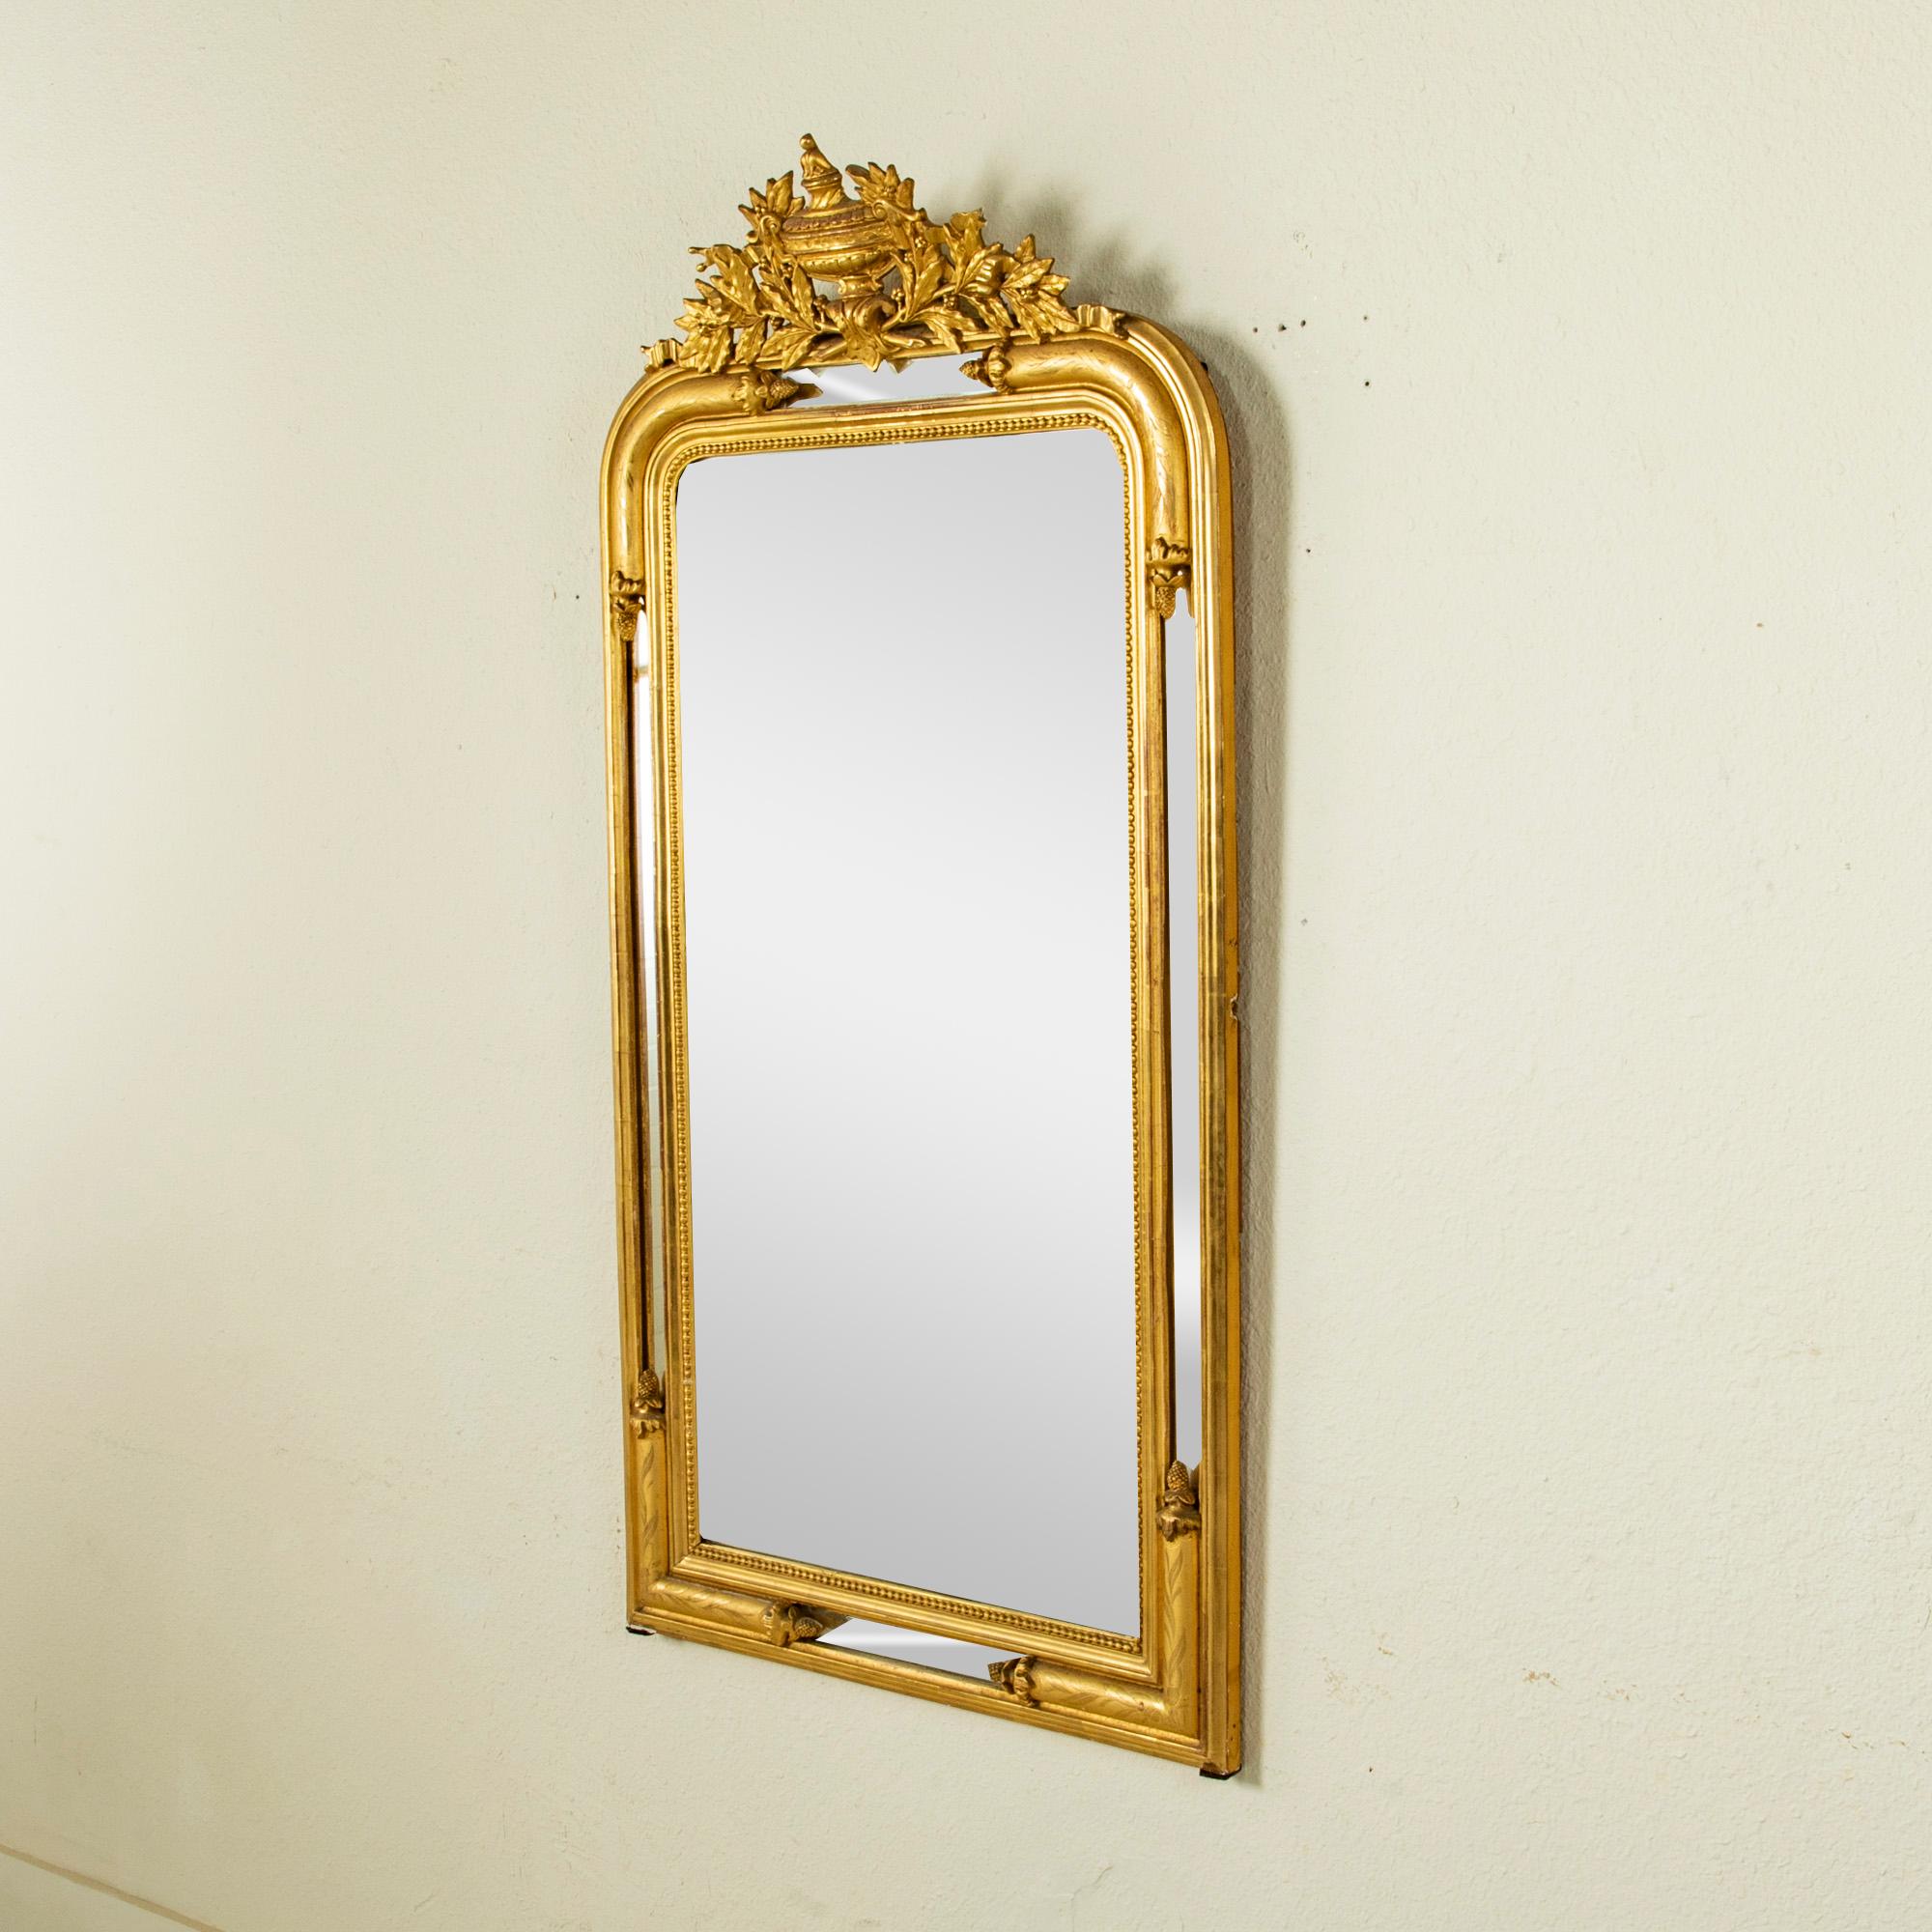 Ideal above a mantel, buffet or chest of drawers, this elegant mid-nineteenth century giltwood Louis XVI style mirror boasts its original beveled mercury glass. Its ornate frame is hand-carved with an urn at the crown flanked by scrolling ribbons